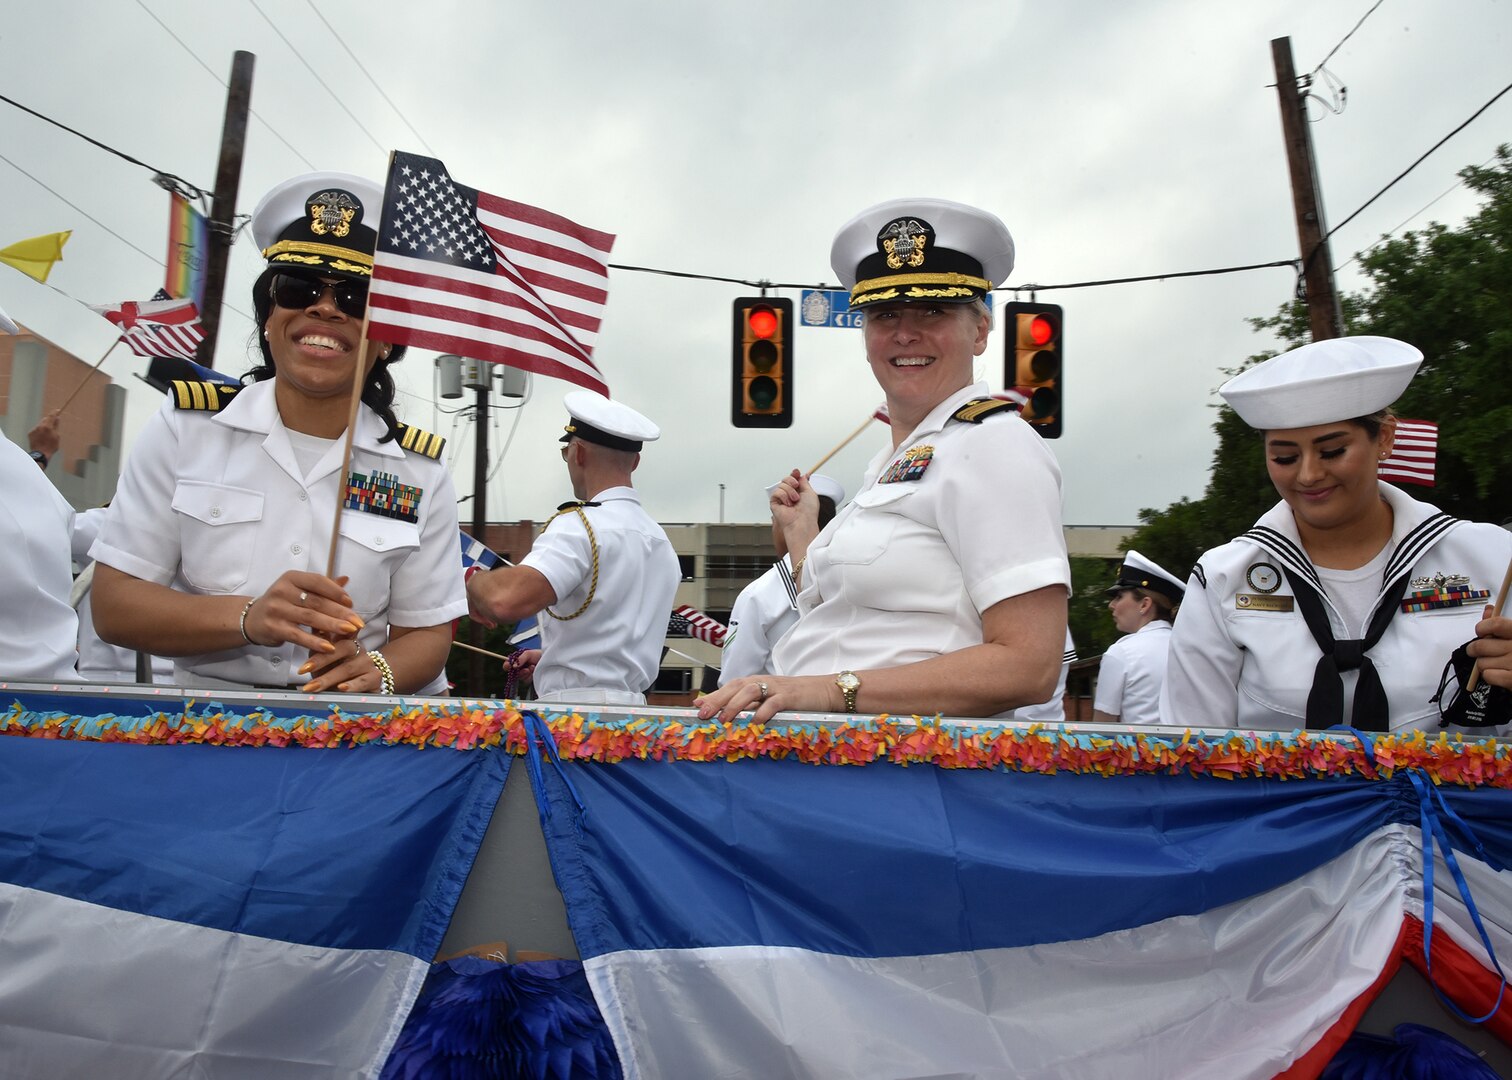 SAN ANTONIO - (April 26, 2024) –   Capt. Jennifer Buechel (Nurse Corps), commanding officer, Naval Medical Research Unit (NAMRU) San Antonio (right), and Cmdr. Nneoma Lewis (Nurse Corps), non-medical medical case manager, Navy Wounded Warrior (NWW) Program, Navy Region Southeast, participated in the Battle of Flowers Parade held during Fiesta San Antonio. The Battle of Flowers Parade is the oldest event and largest parade of Fiesta San Antonio attracting crowds of more than 350,000. Leading the Sailors in the parade was Rear Adm. Walter Brafford, commander, Naval Medical Forces Support Command (NMFSC). Joint Base San Antonio is proud to be part of the diverse and vibrant community of San Antonio also known as Military City USA. (U.S. Navy Photo by Burrell Parmer, Naval Medical Research Unit San Antonio Public Affairs/Released)